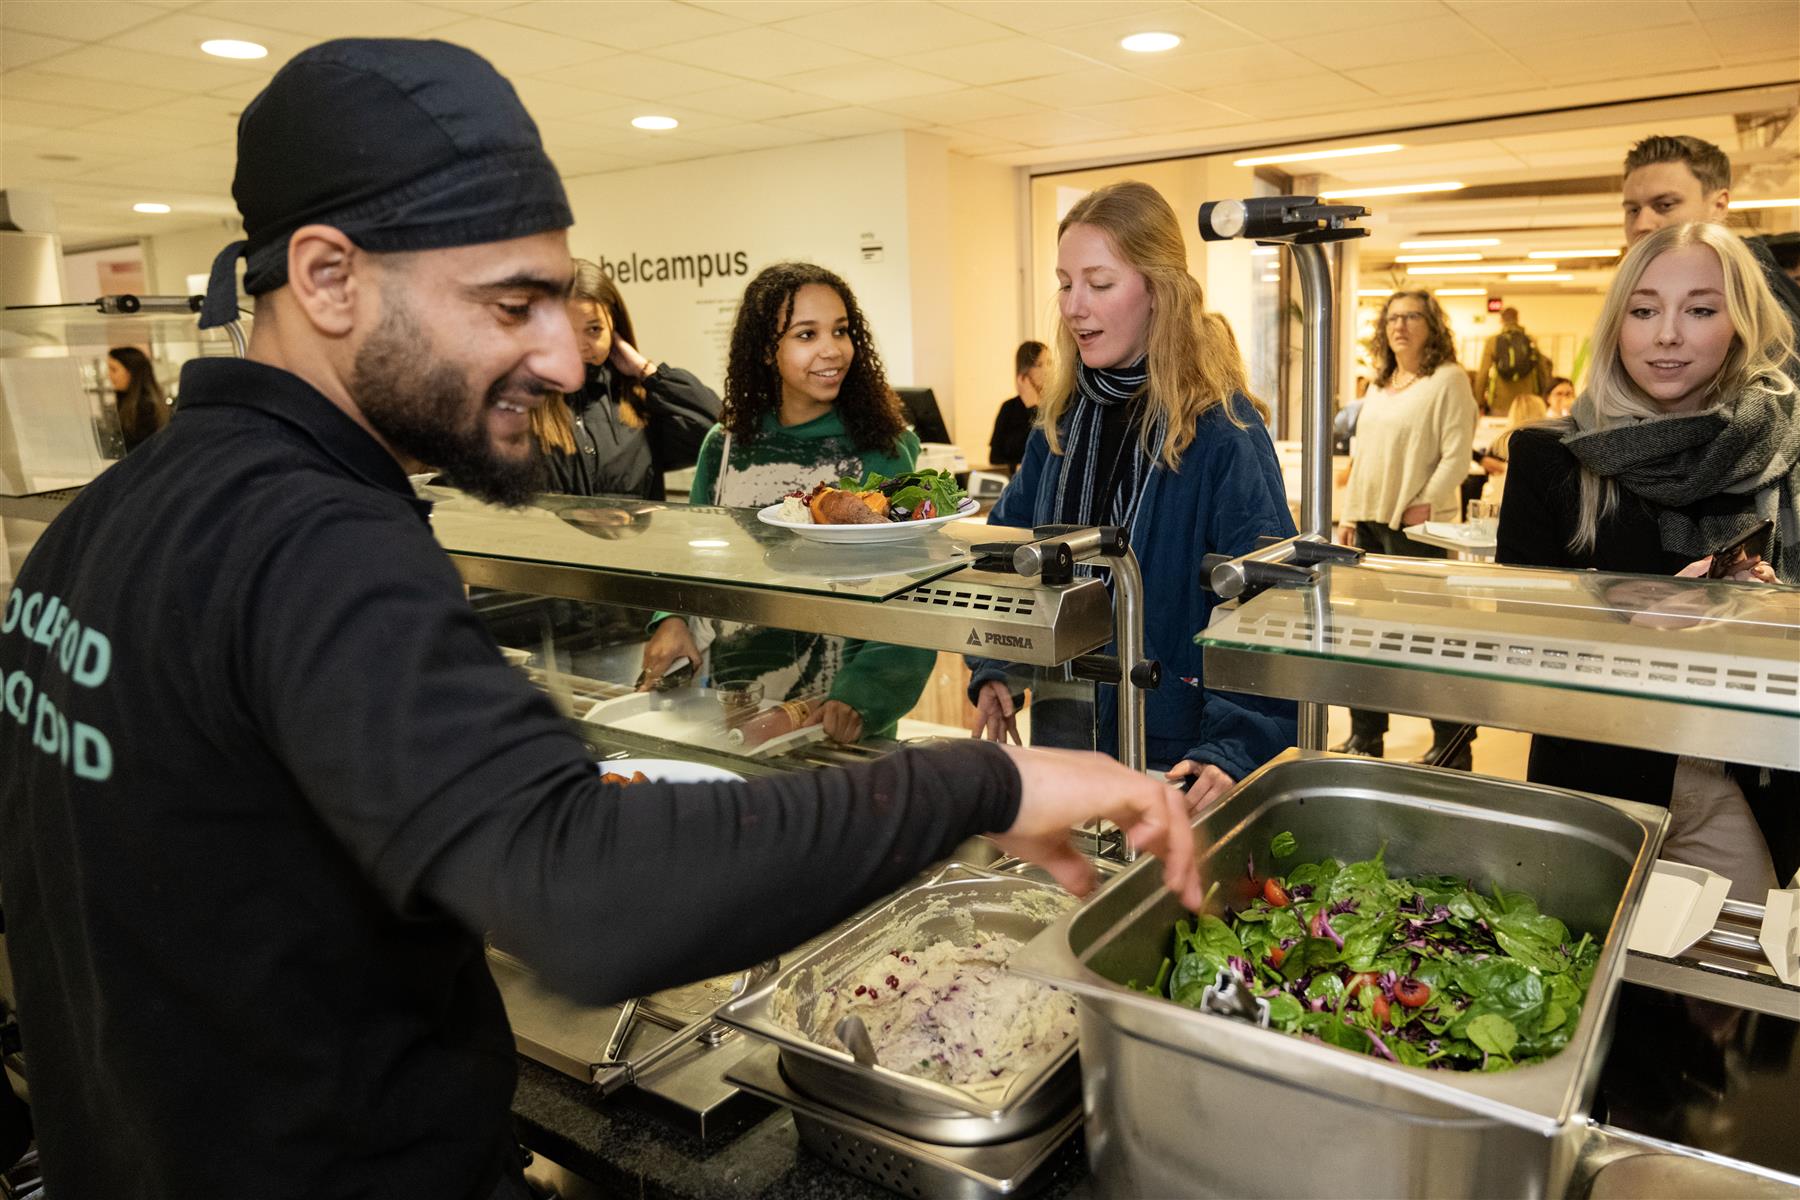 Odisee College's lunch restaurant serves seasonal, sustainable and delicately daily fresh daily dishes